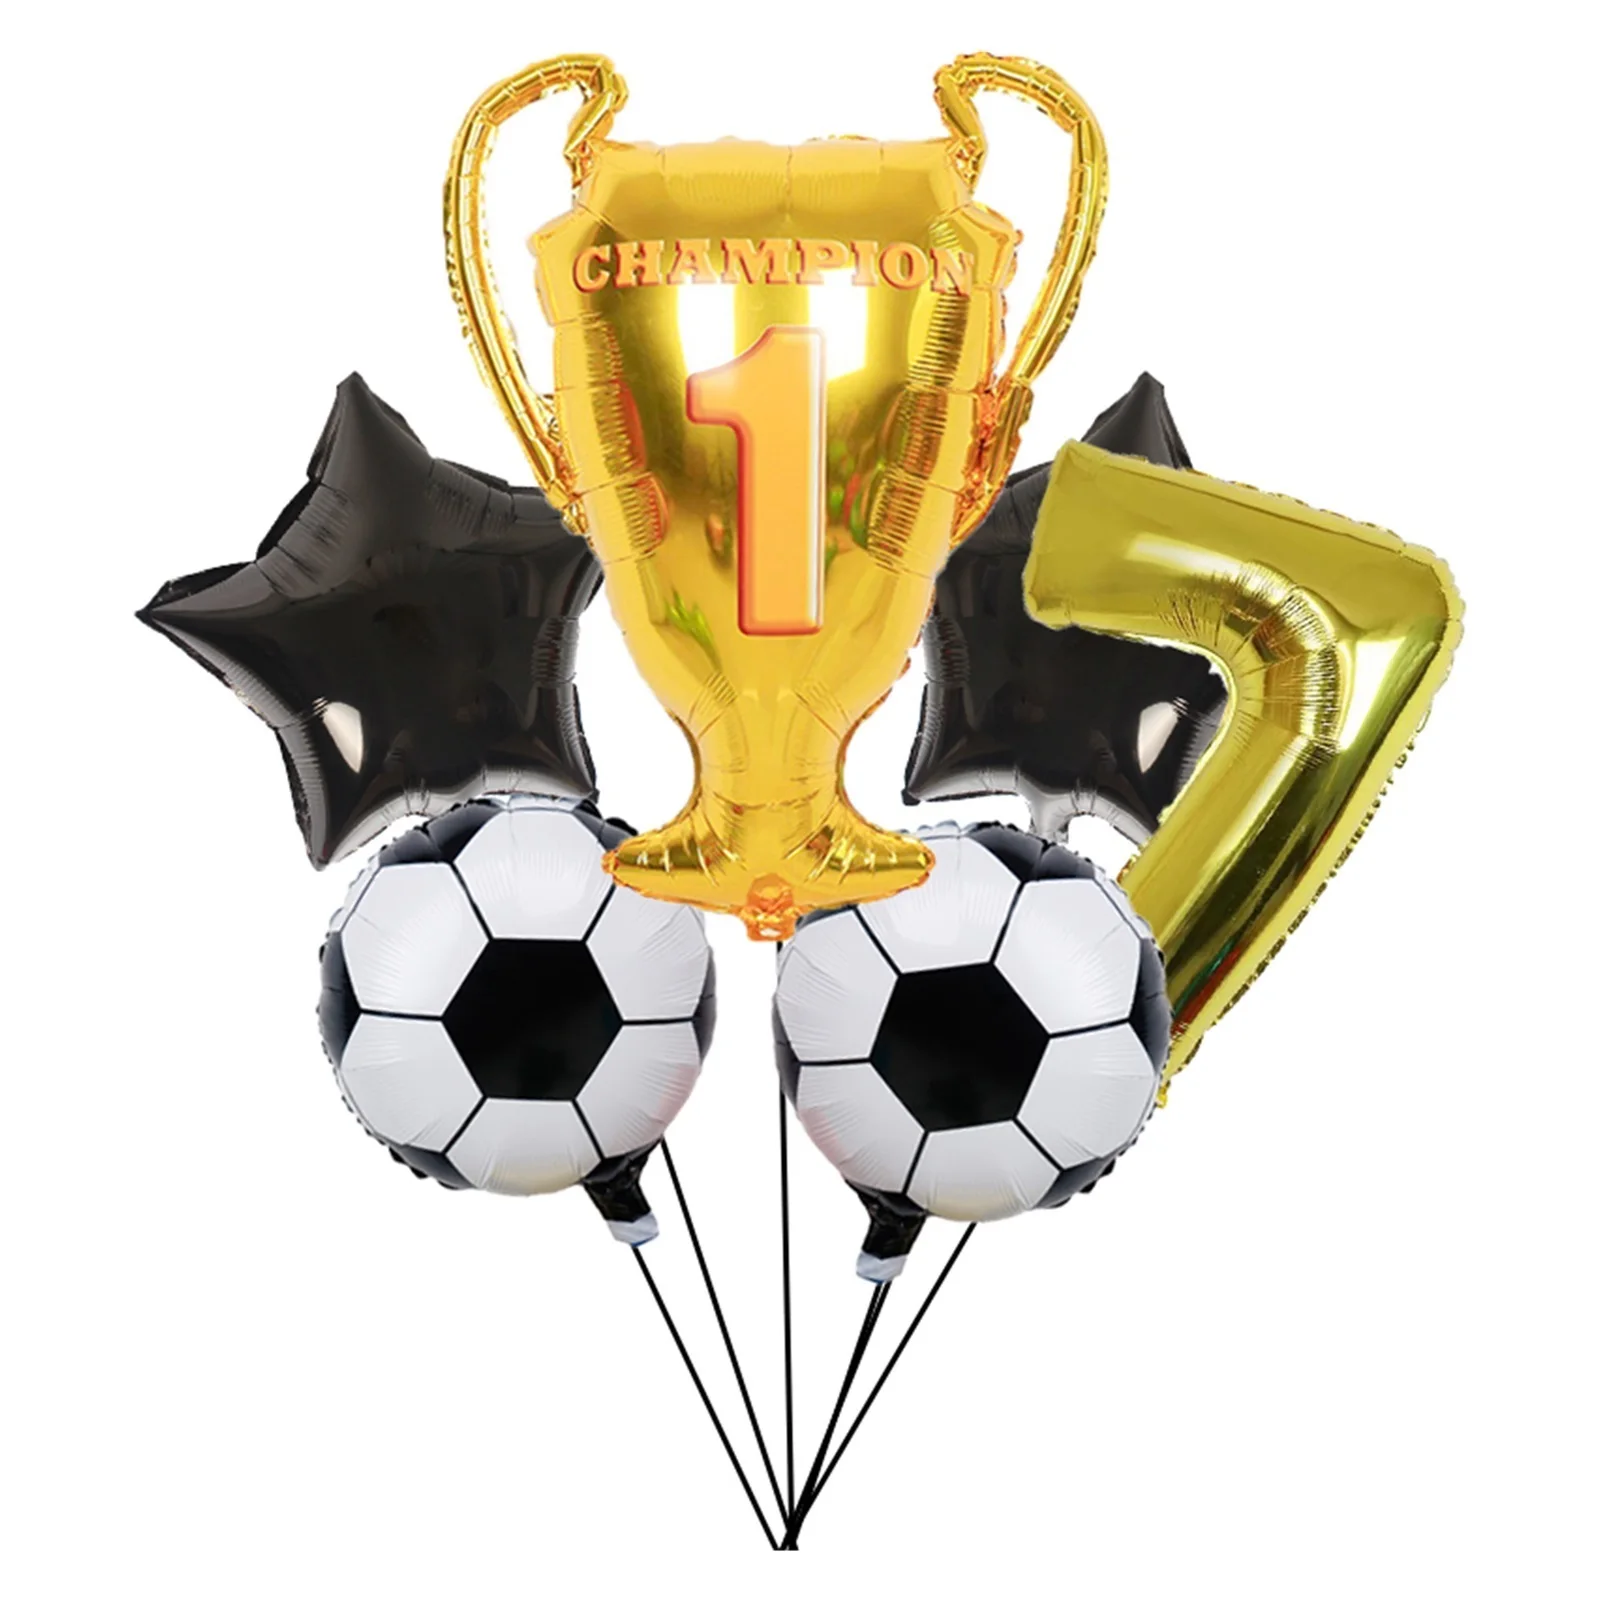 

7pcs/lot 18inch Football Soccer Theme Round Foil Balloons 32inch Gold Number Trophy Balls Sport Baby Boy Birthday Party Globos